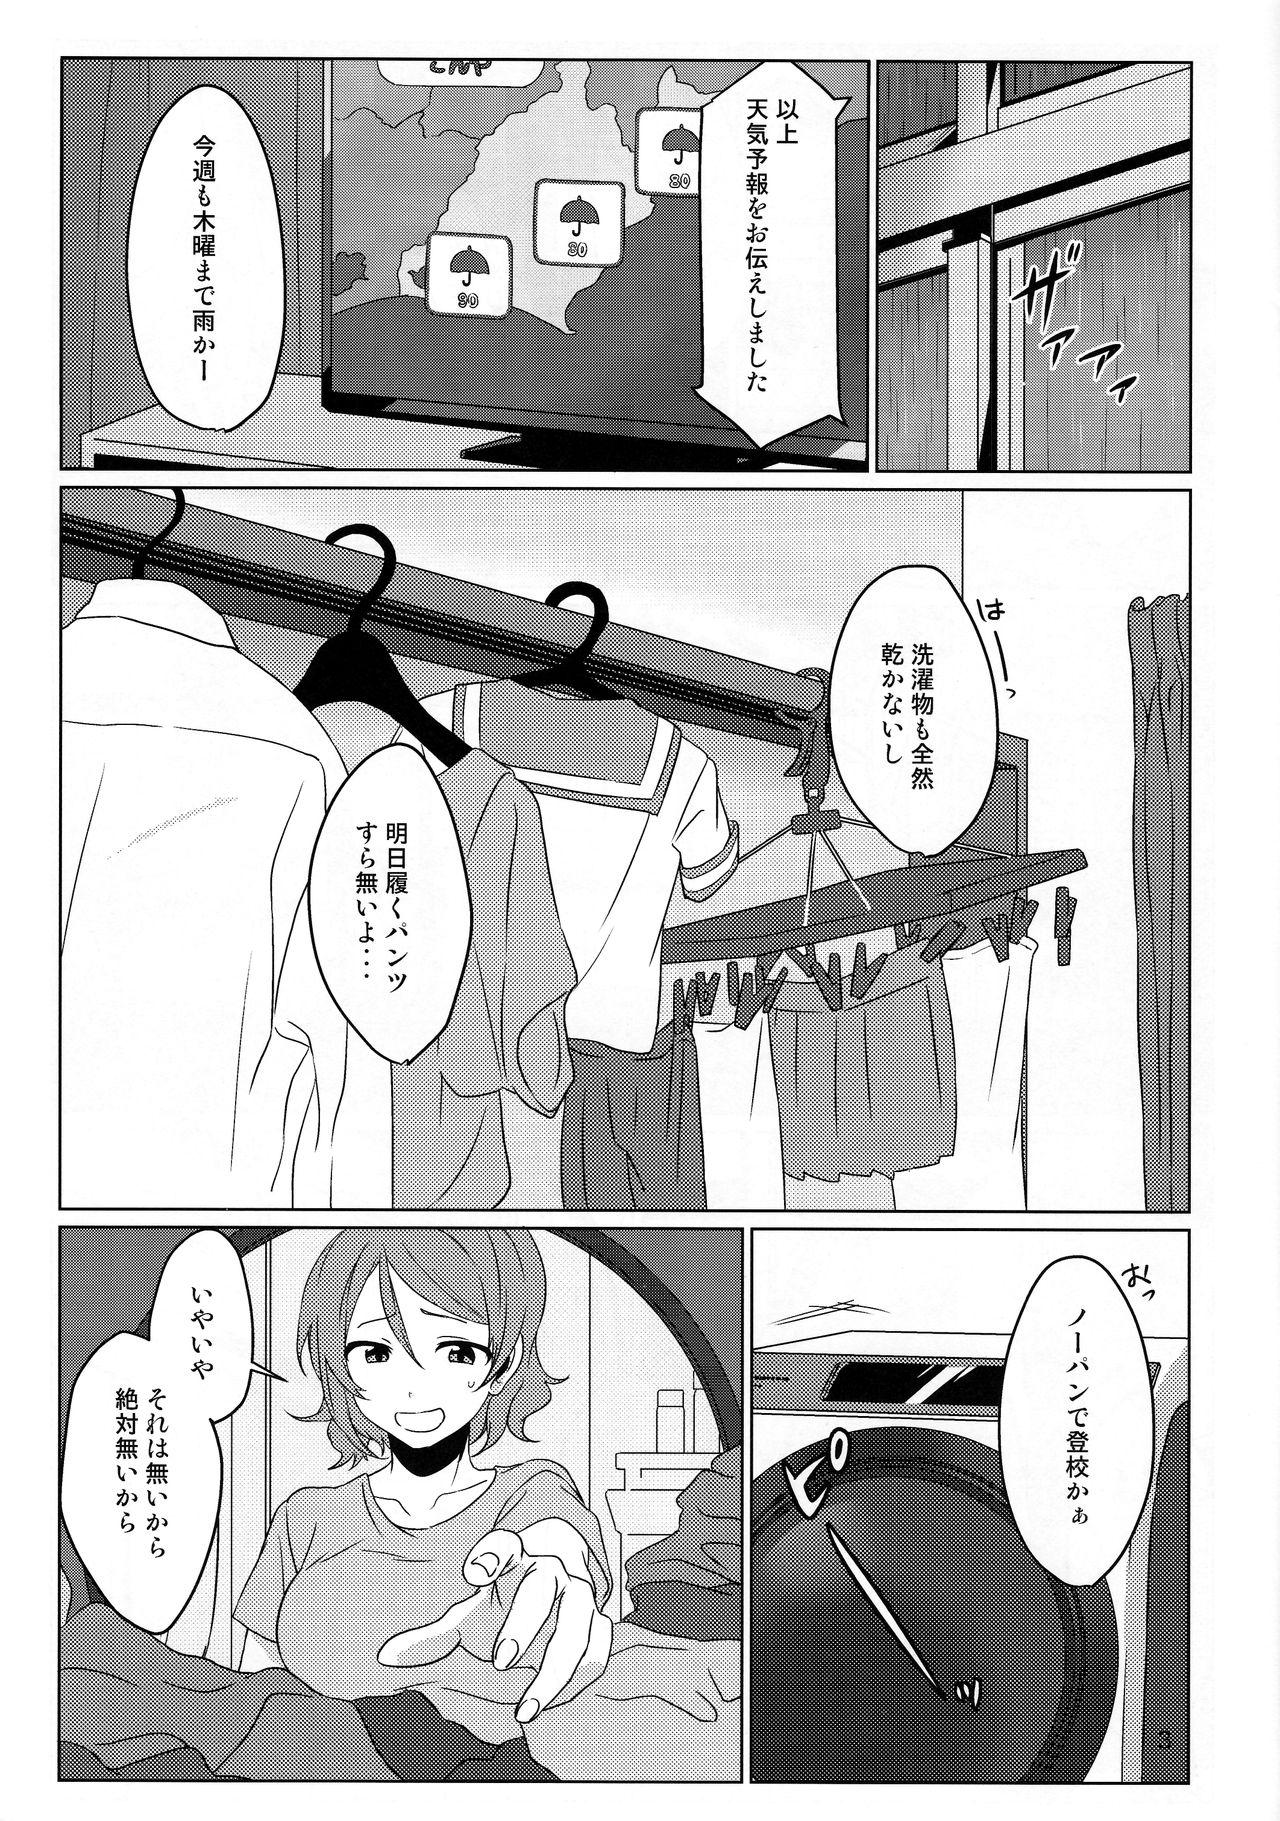 Gaping Coin laundry - Love live sunshine Doggystyle - Page 2